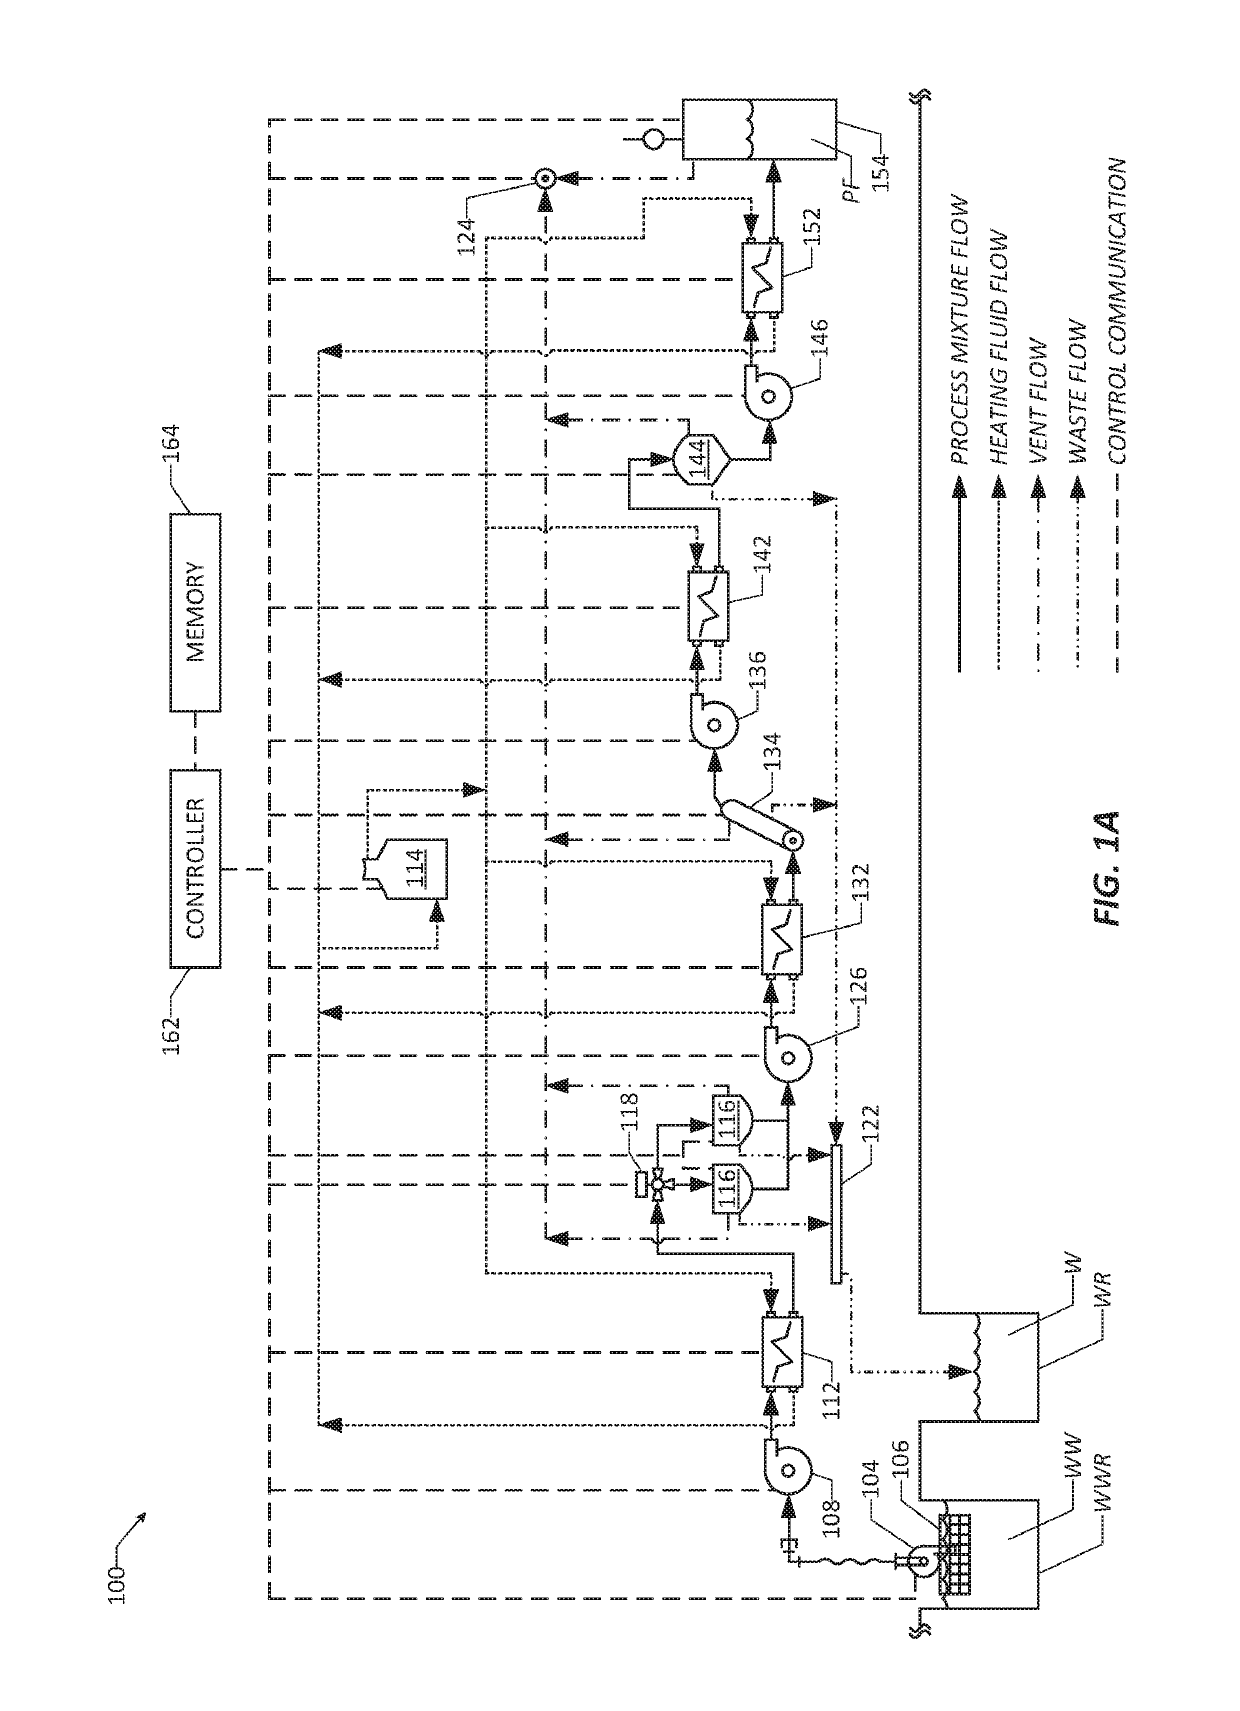 Systems and methods for purification of fats, oils, and grease from wastewater